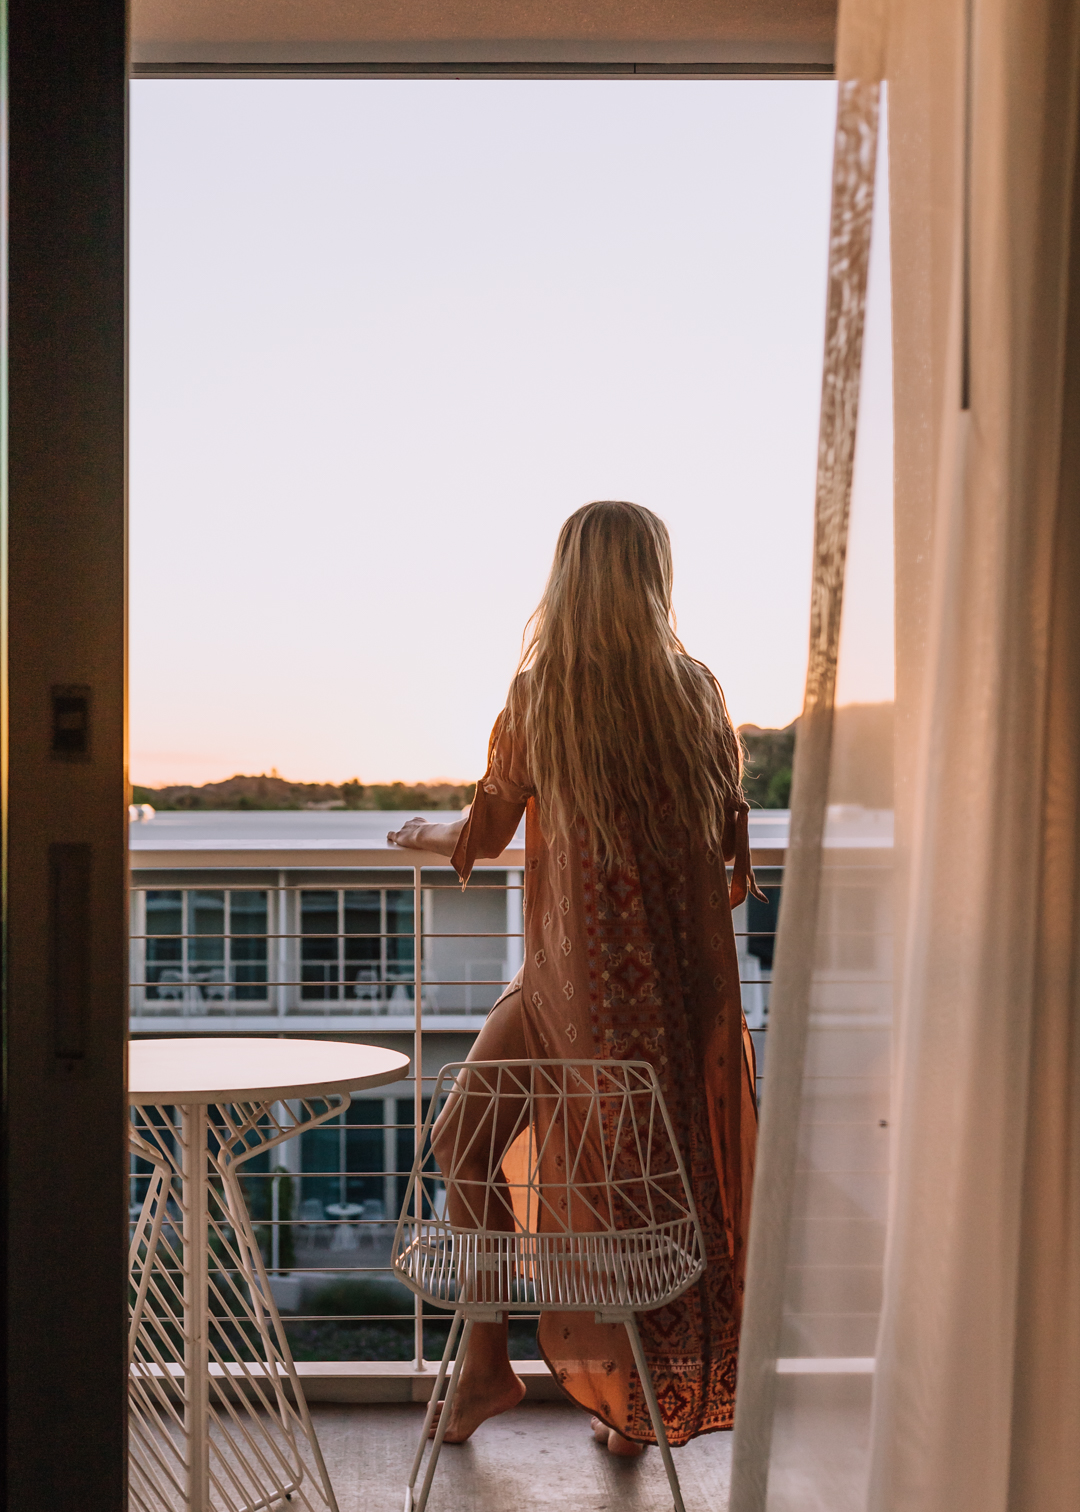 dreamy sunset views from our mountain shadows balcony | thelovedesignedlife.com #sunset #resort